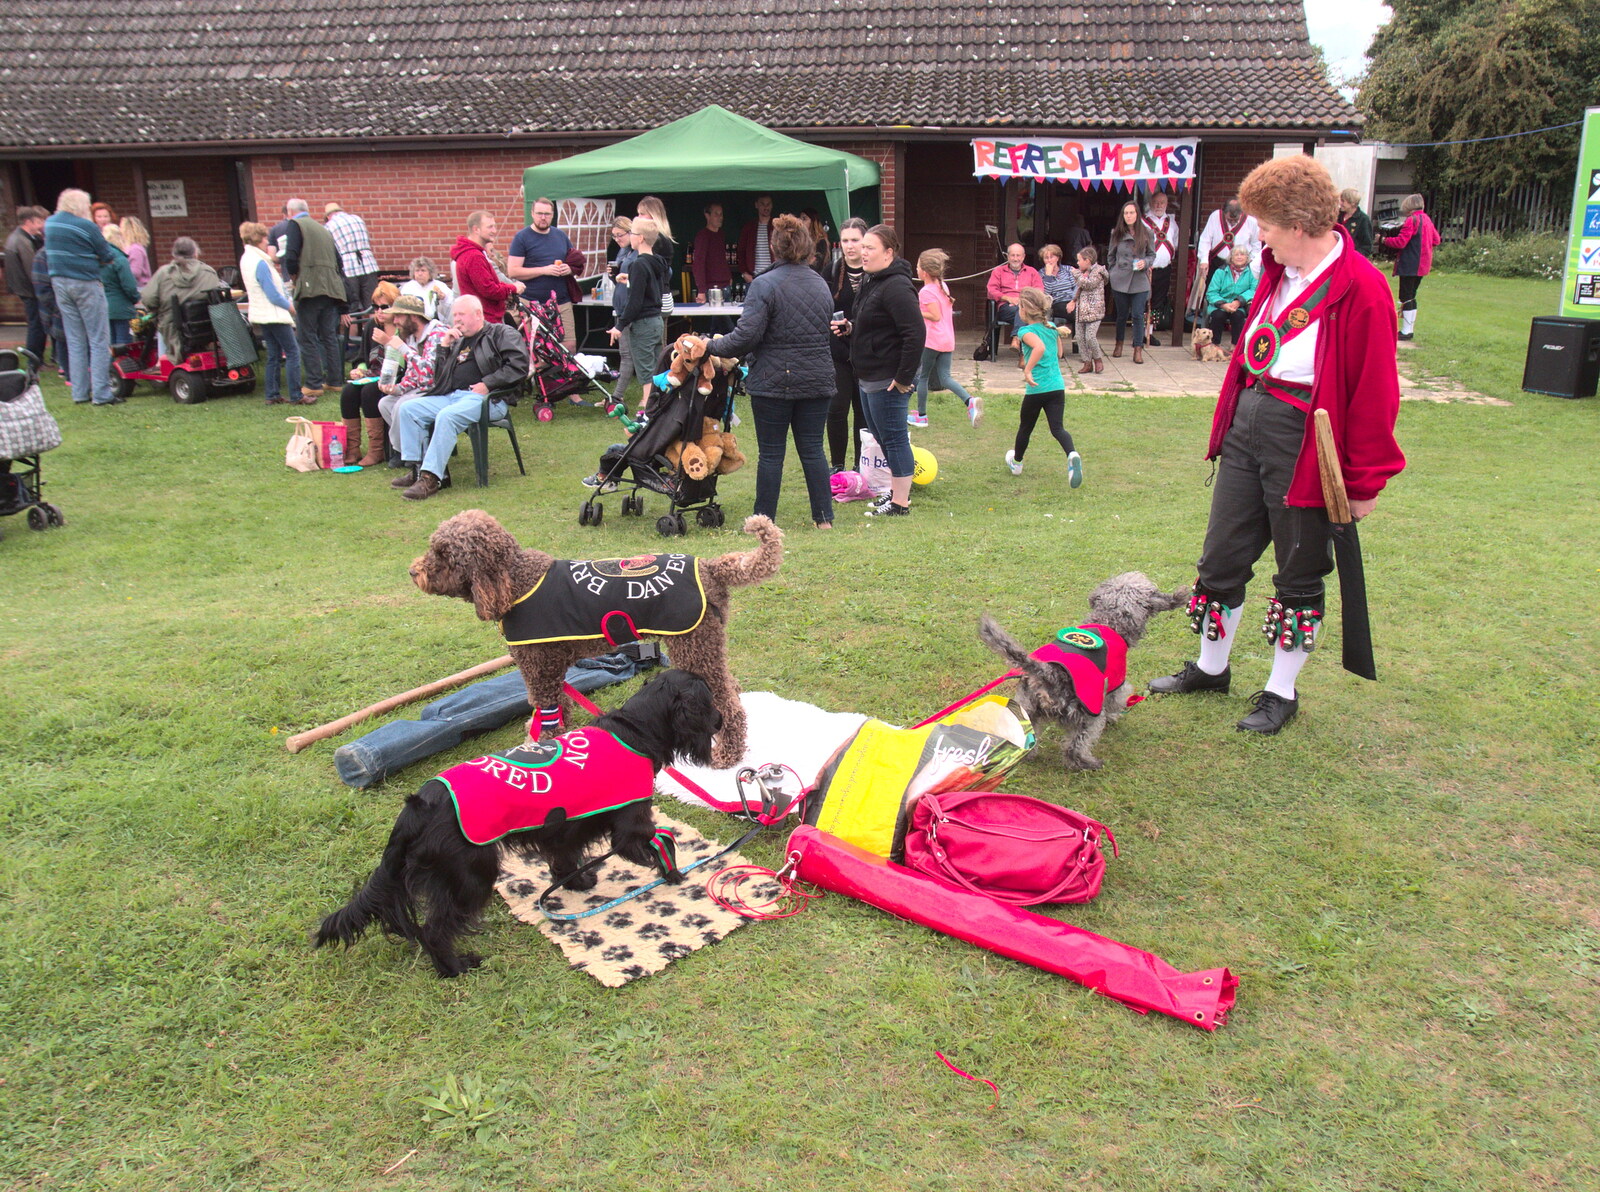 Outside, the Morris dogs stand around from A Summer Fete, Palgrave, Suffolk - 10th September 2017